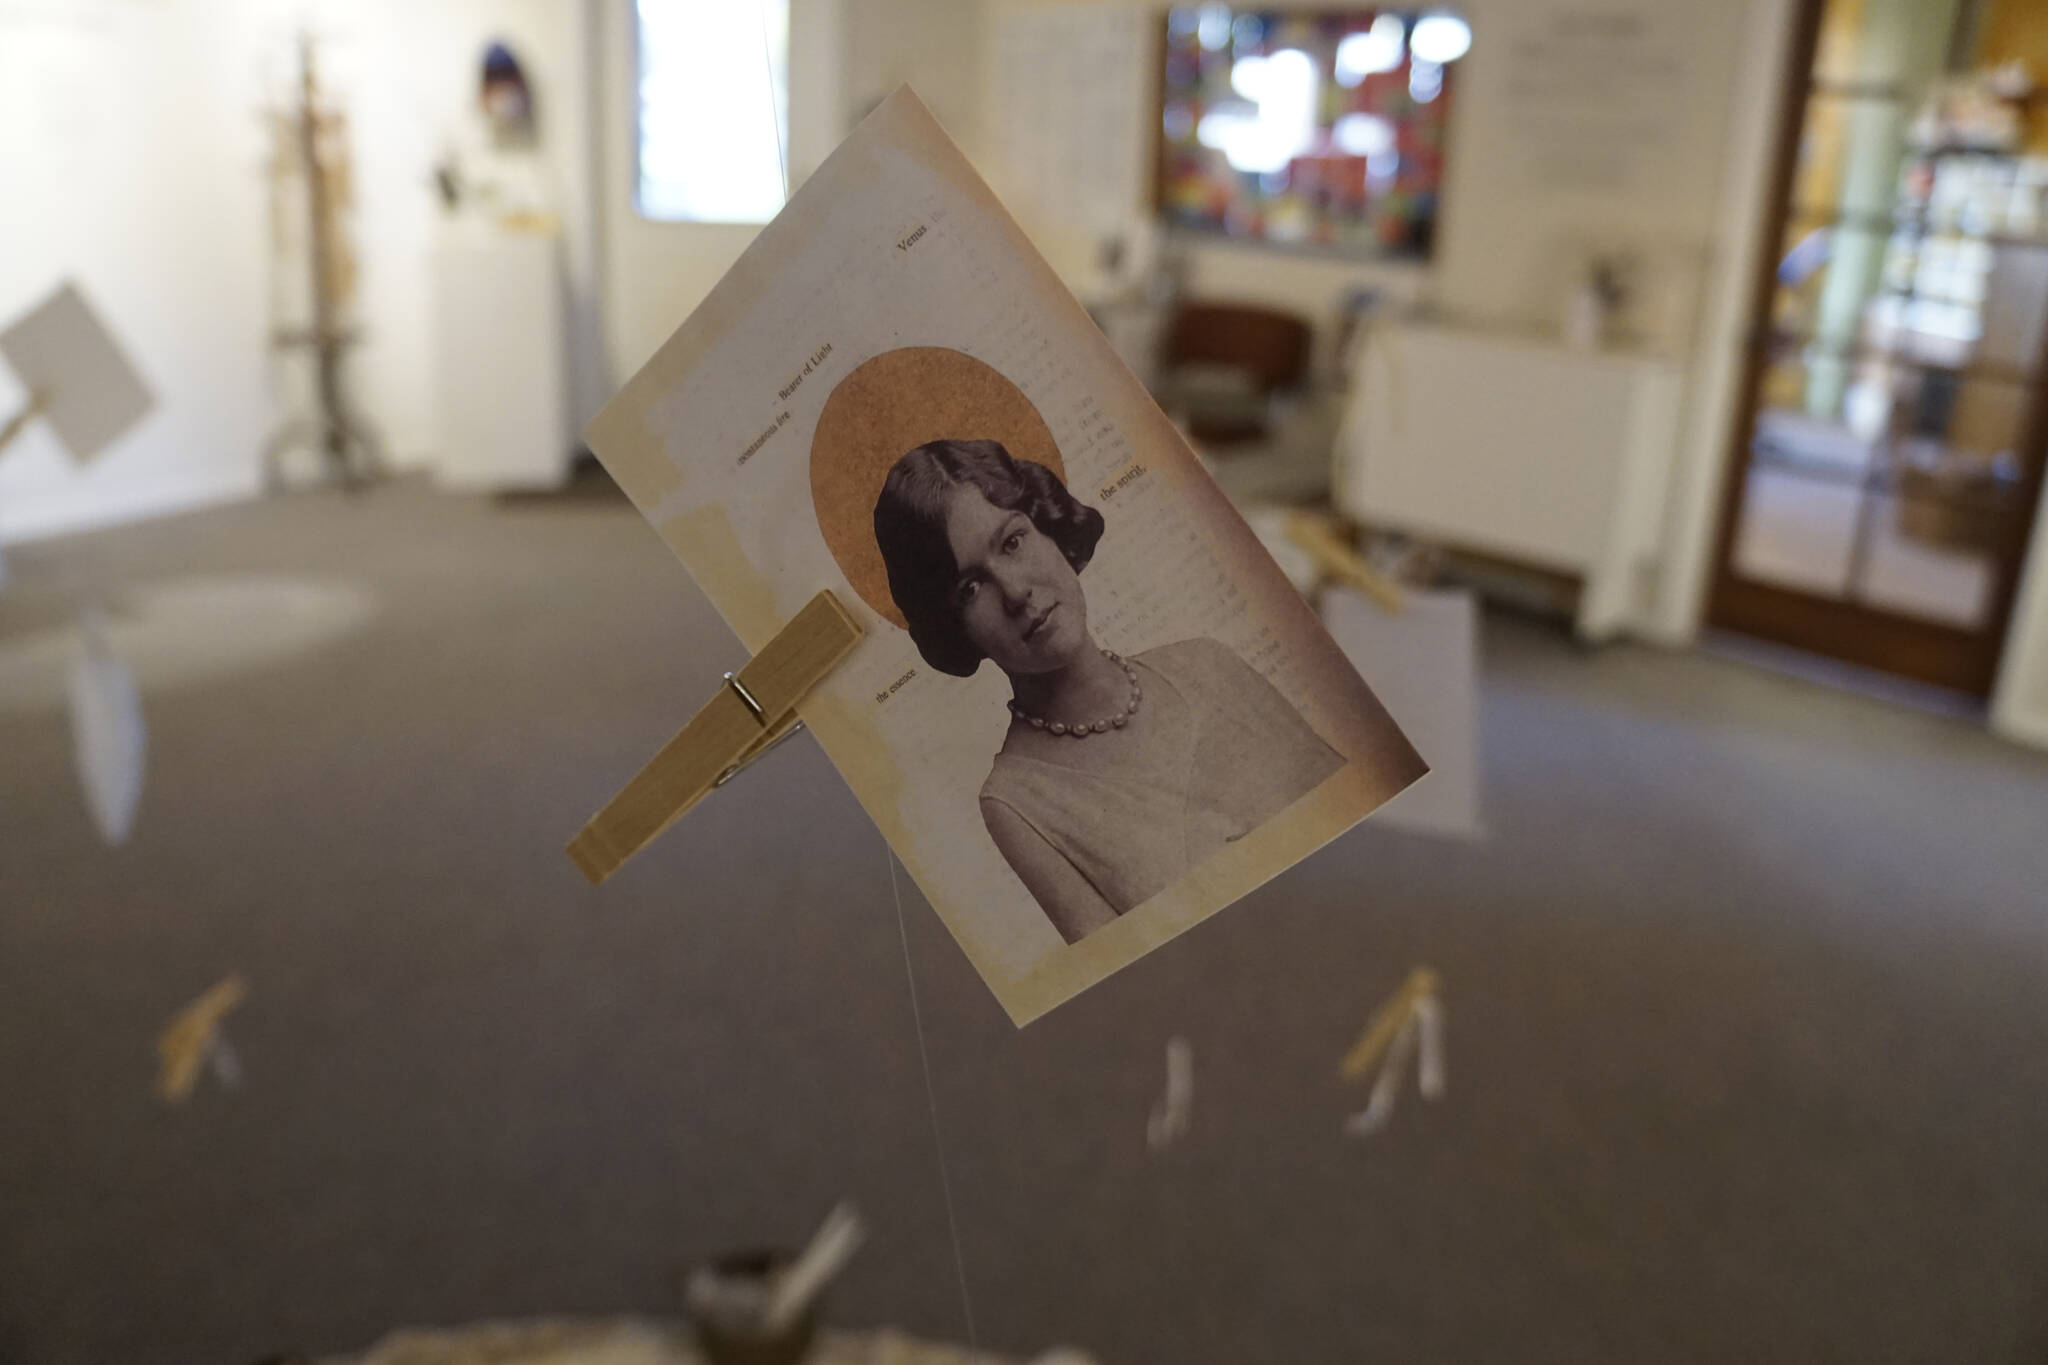 For Carly Garay's "The Art of Ancestor Veneration," visitors are invited to include images, letters or prayers honoring ancestors at a central display. The exhibit shows through Oct. 30, 2021, at the Homer Council on the Arts in Homer, Alaska. (Photo by Michael Armstrong/Homer News)